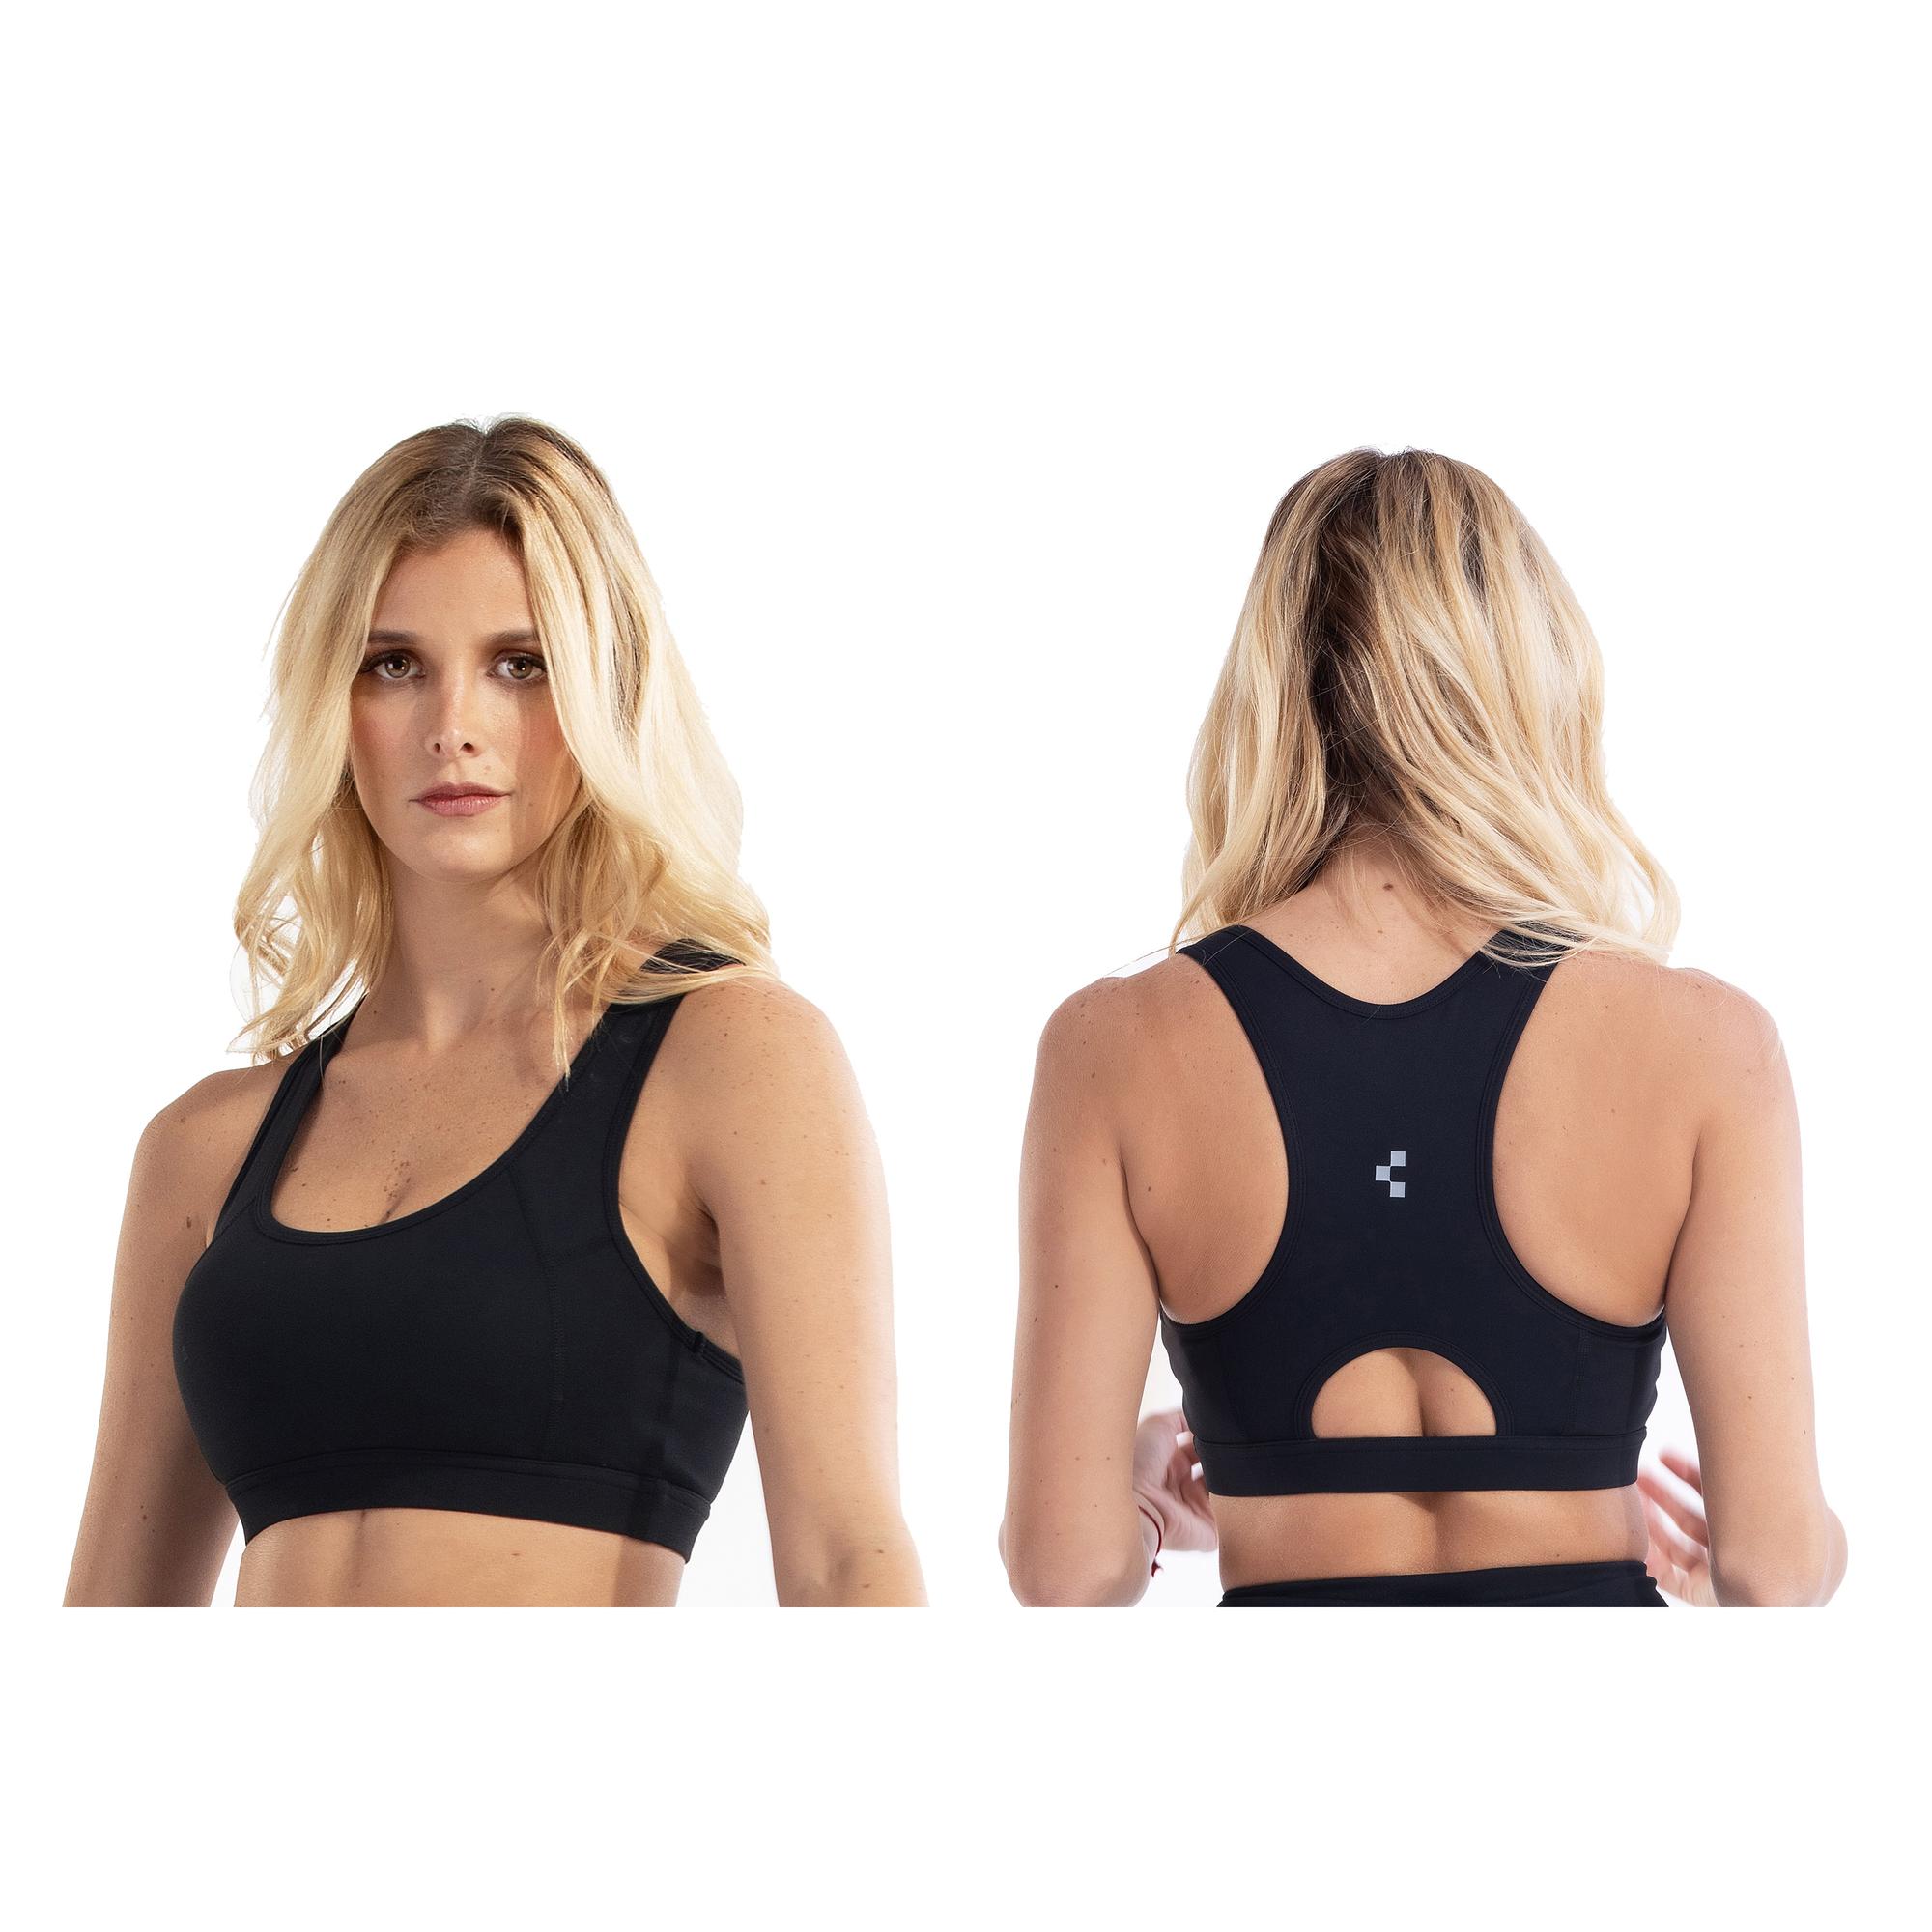 SPORTS BRA WITH REMOVABLE CUP - Noritex